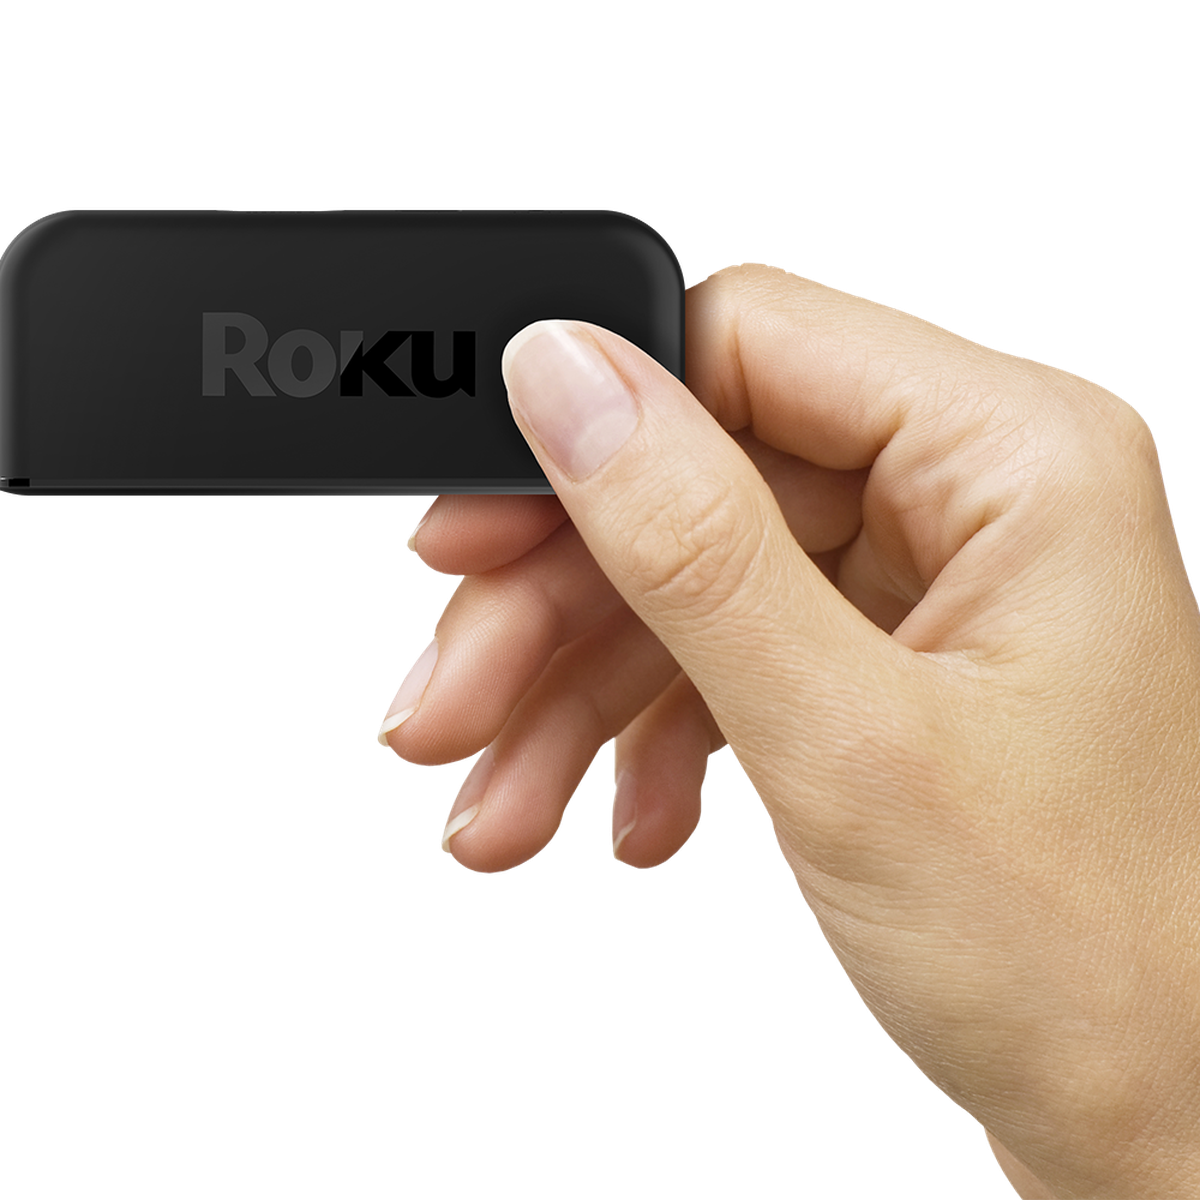 Product shot of a hand holding the Roku Premiere Plus streaming device.